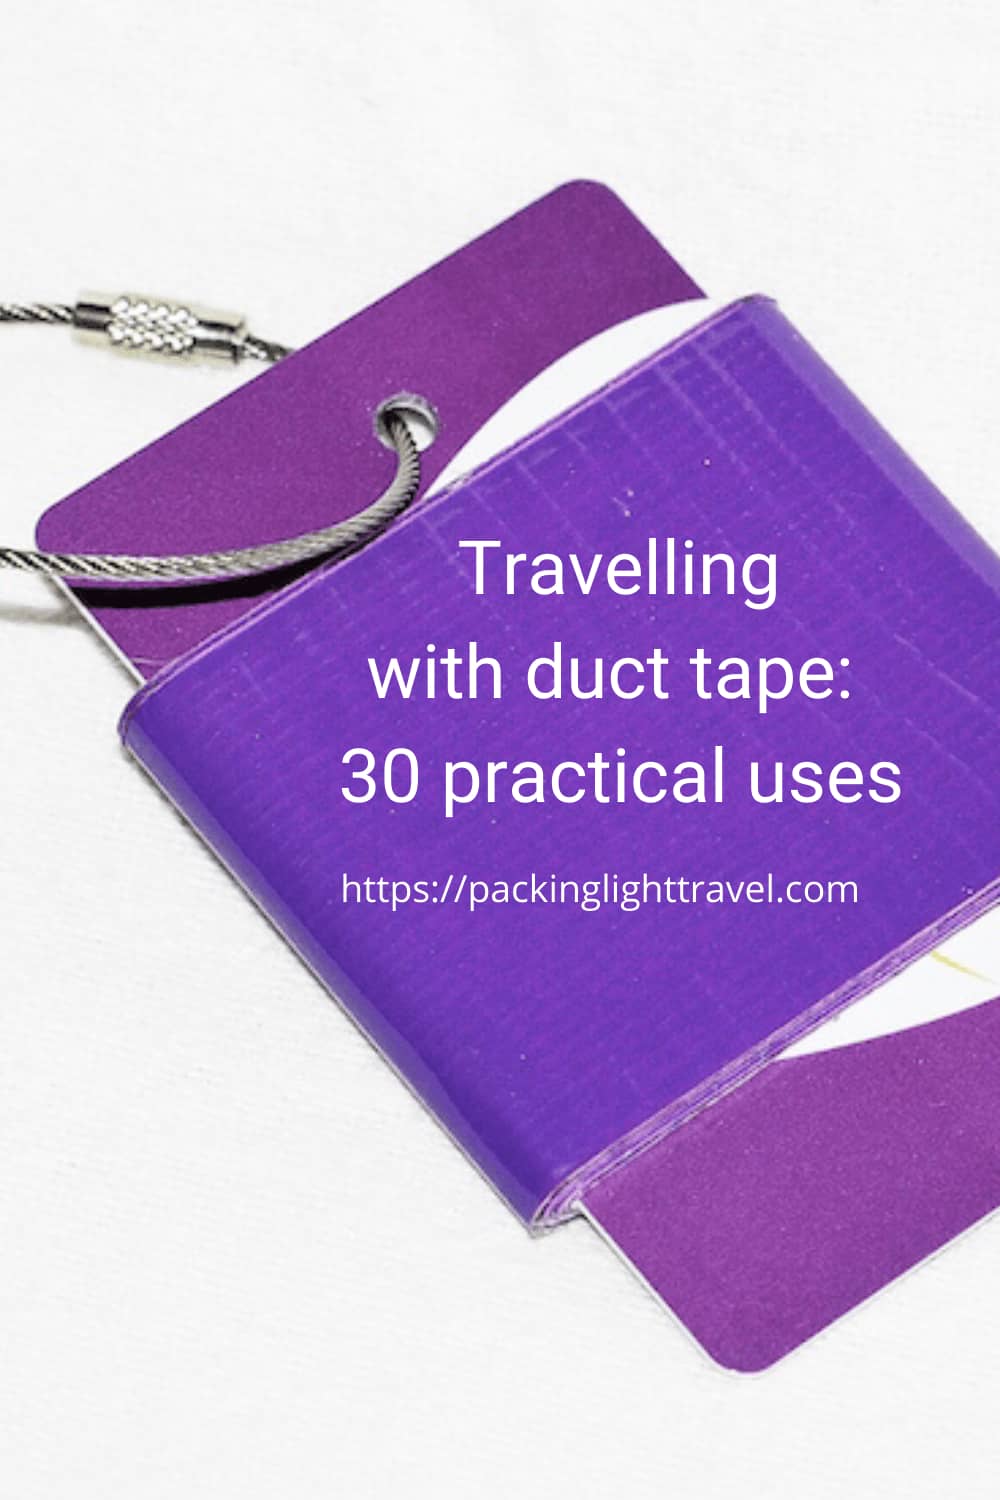 30-uses-duct-tape-travel